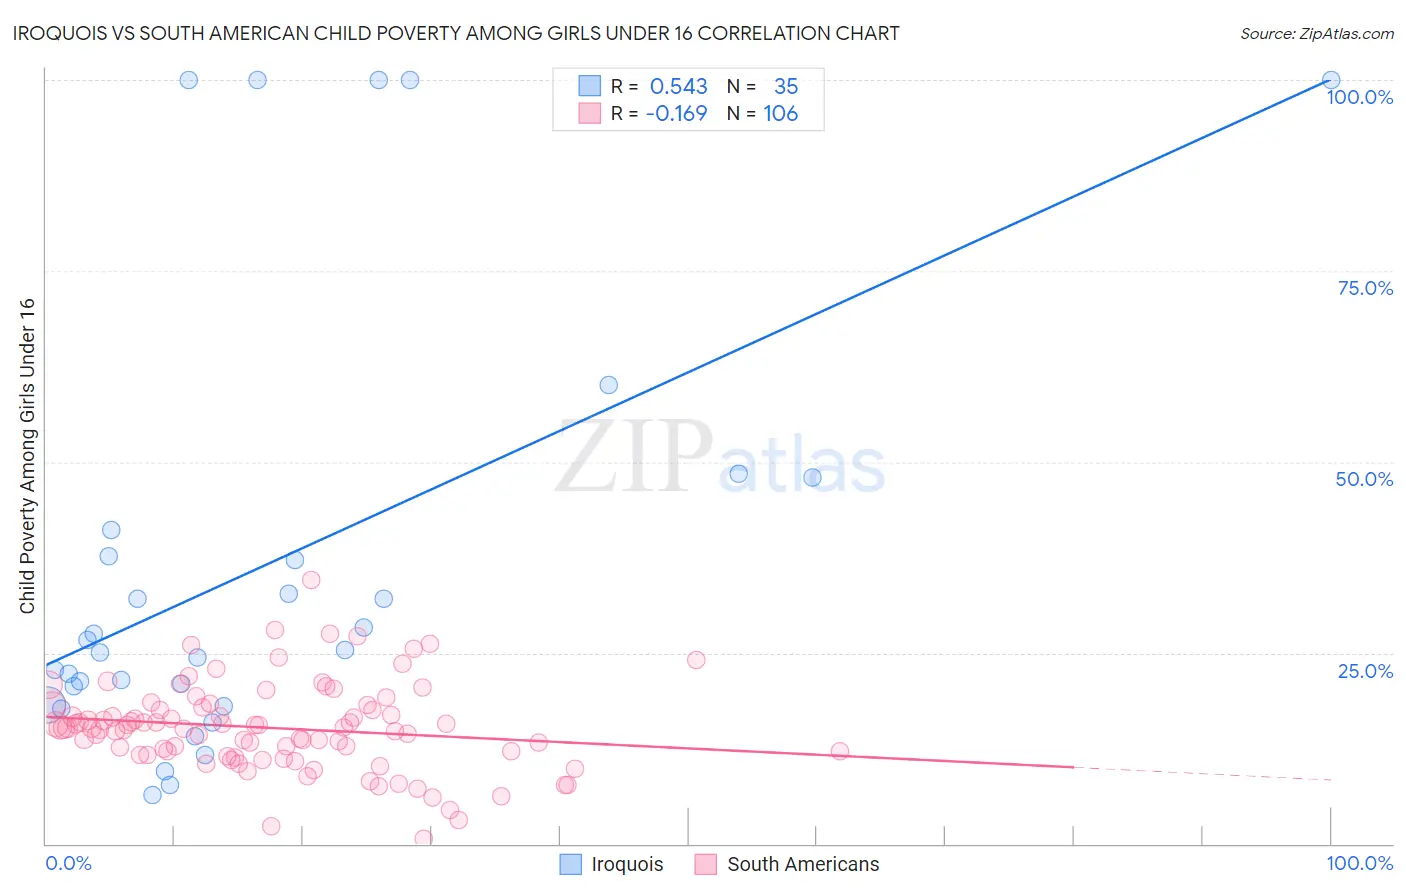 Iroquois vs South American Child Poverty Among Girls Under 16